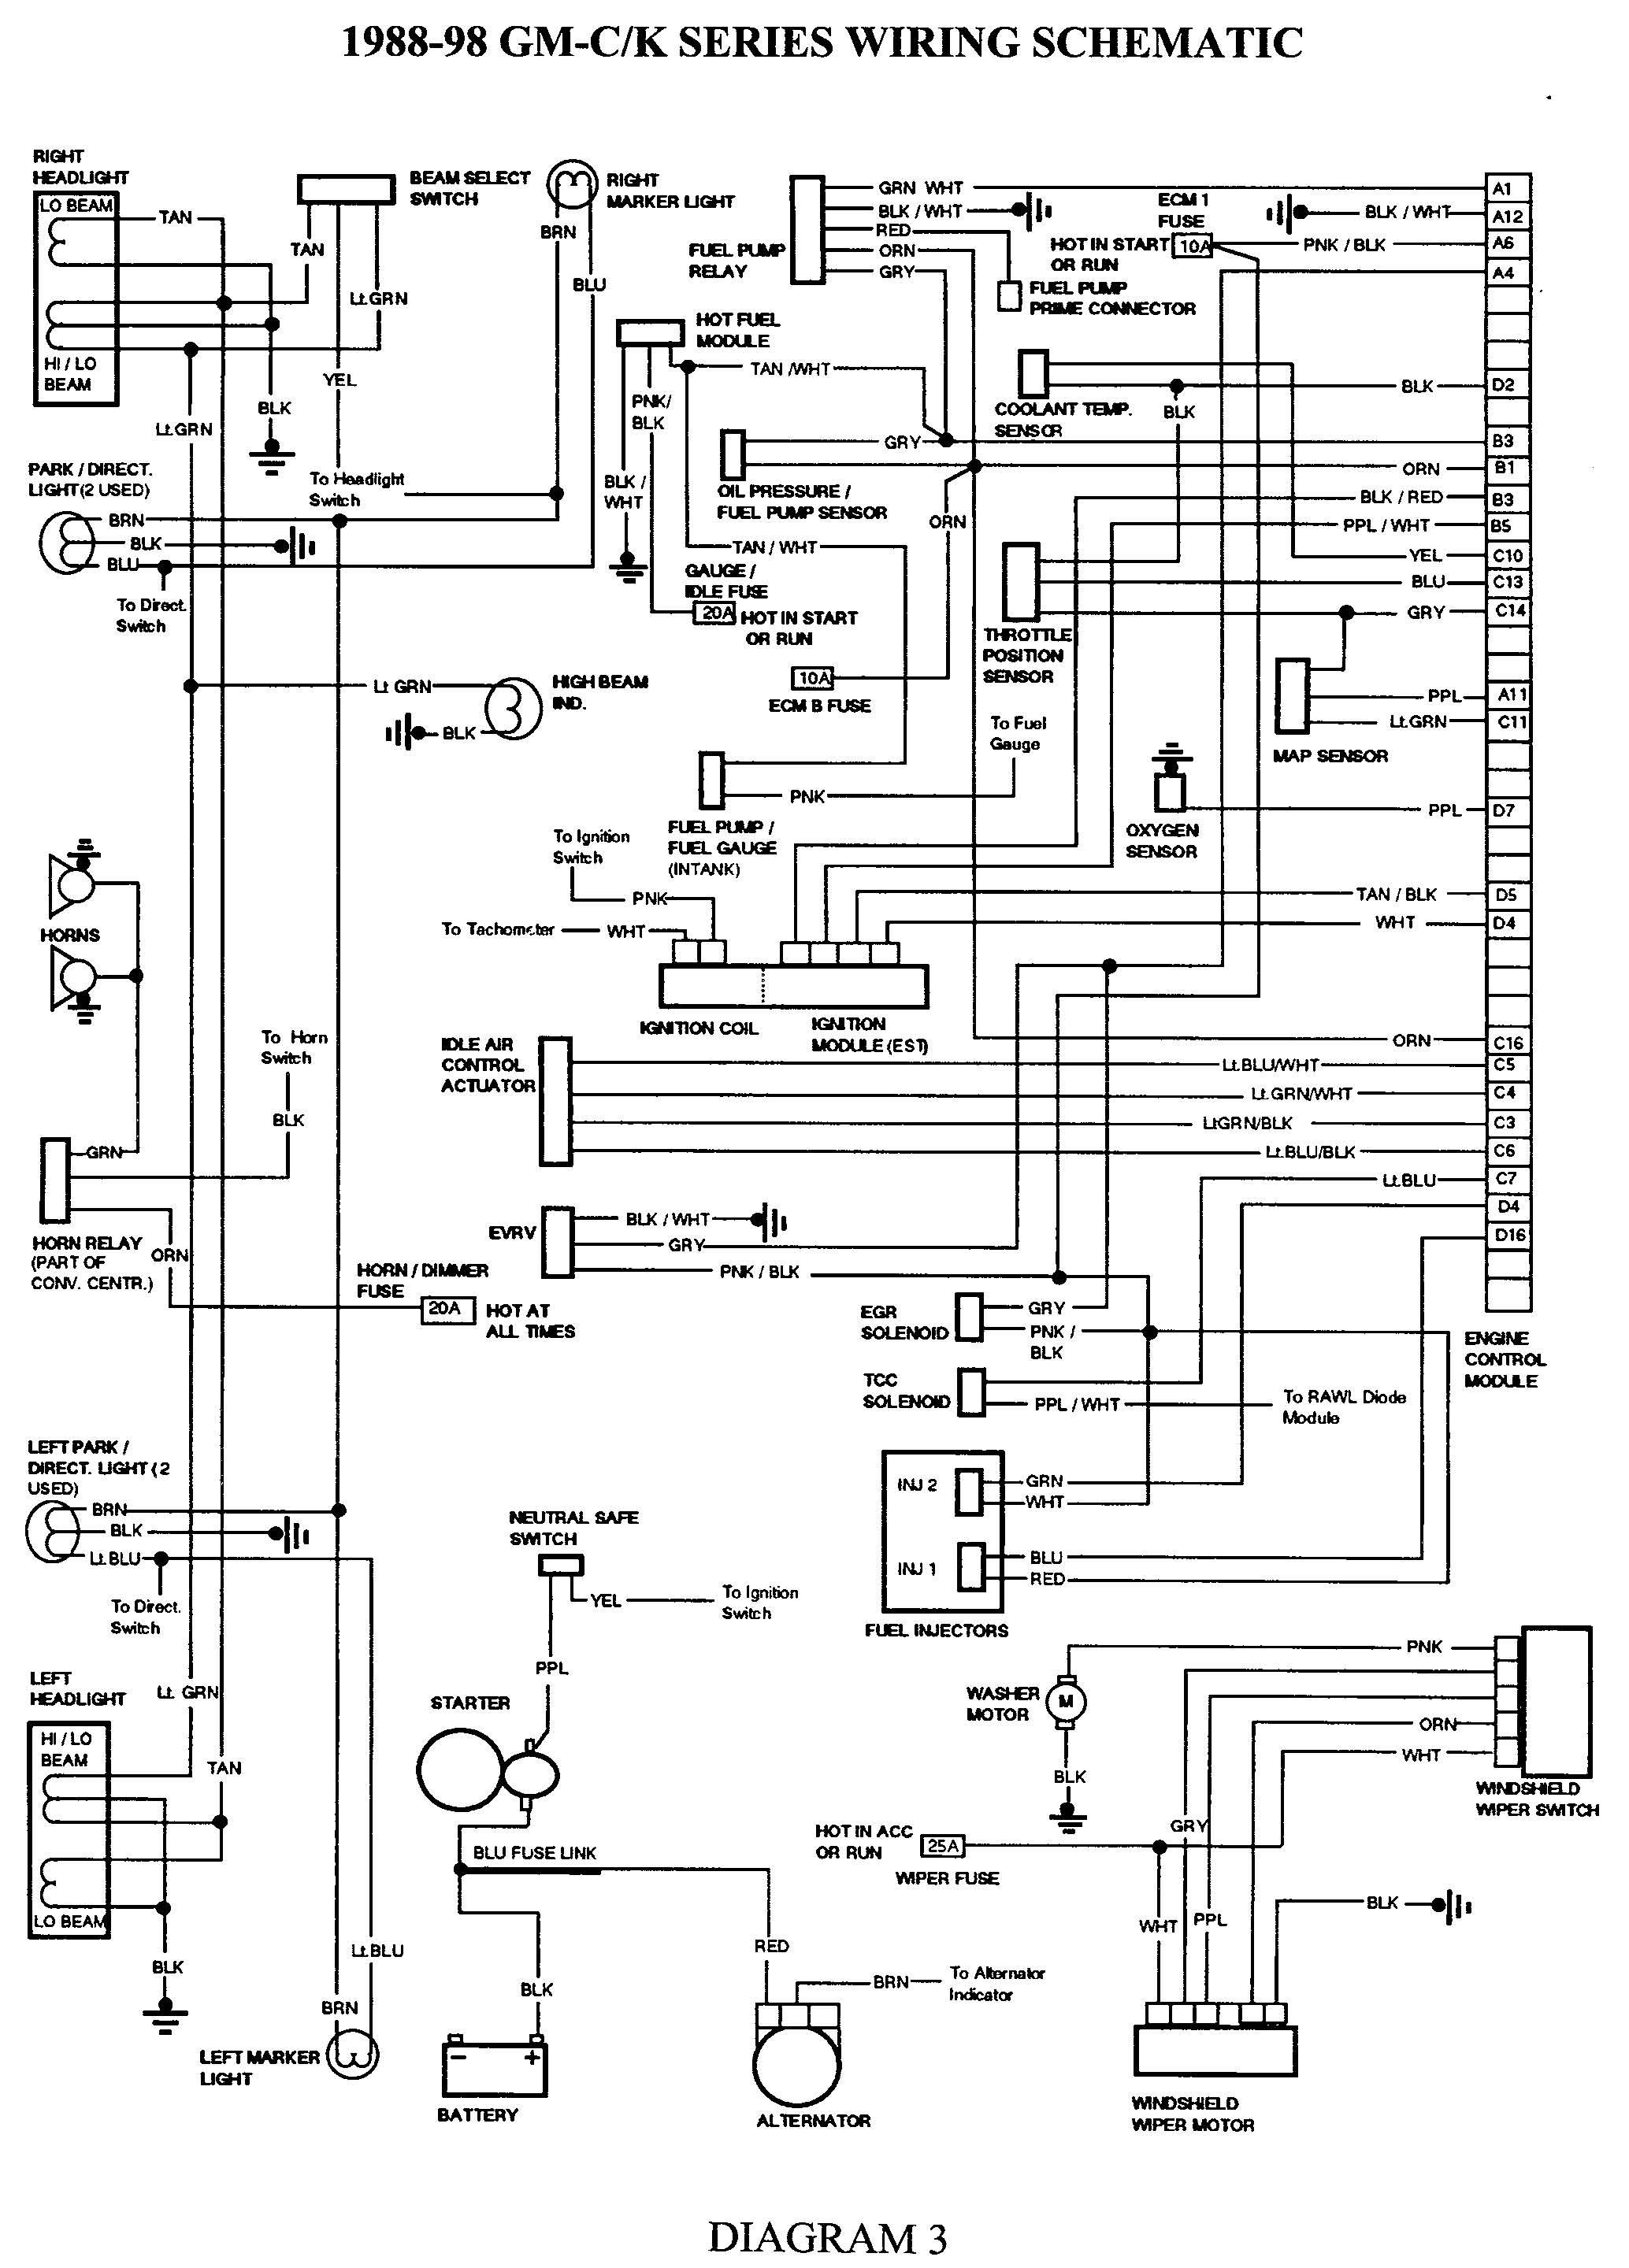 wiring diagram for a 1994 buick skylark streering colunm wire conector